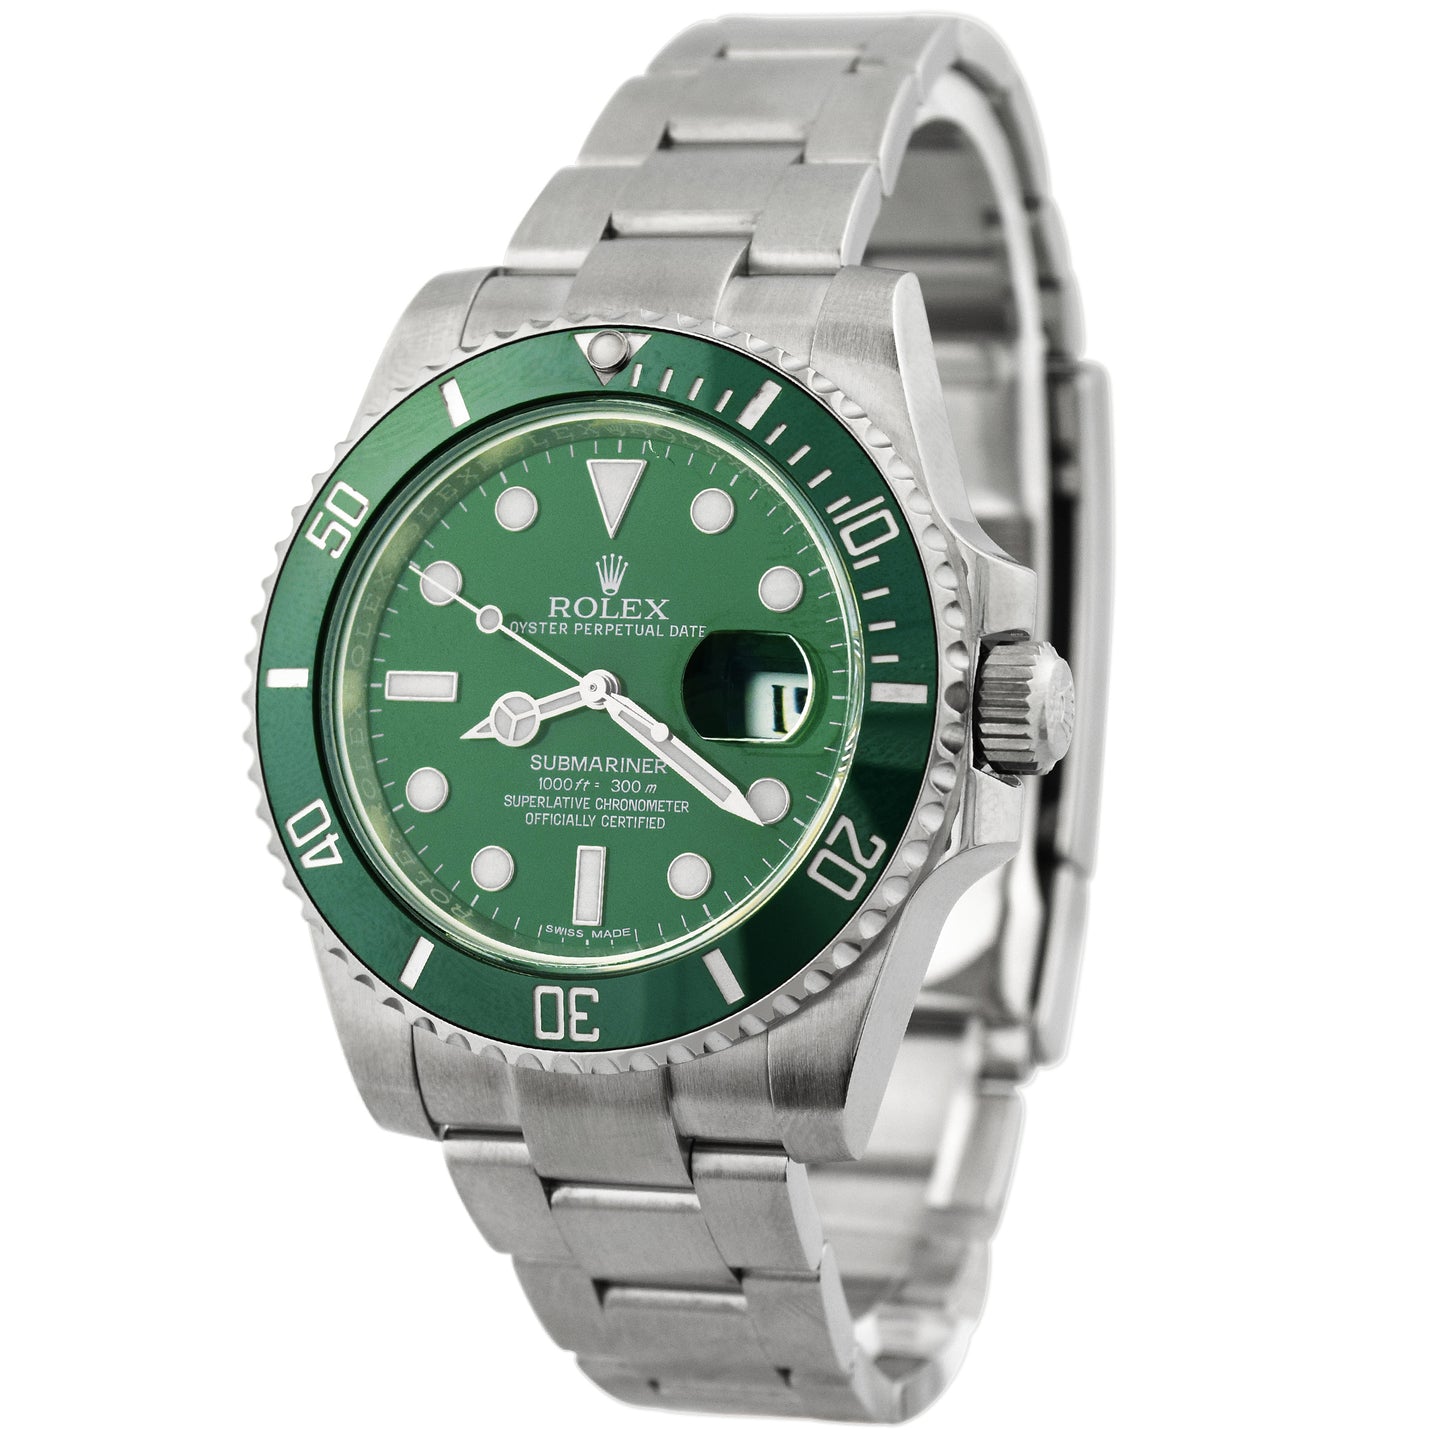 Rolex Men's Submariner "Hulk" Stainless Steel 40mm Green Dot Dial Watch Reference #: 116610LV - Happy Jewelers Fine Jewelry Lifetime Warranty